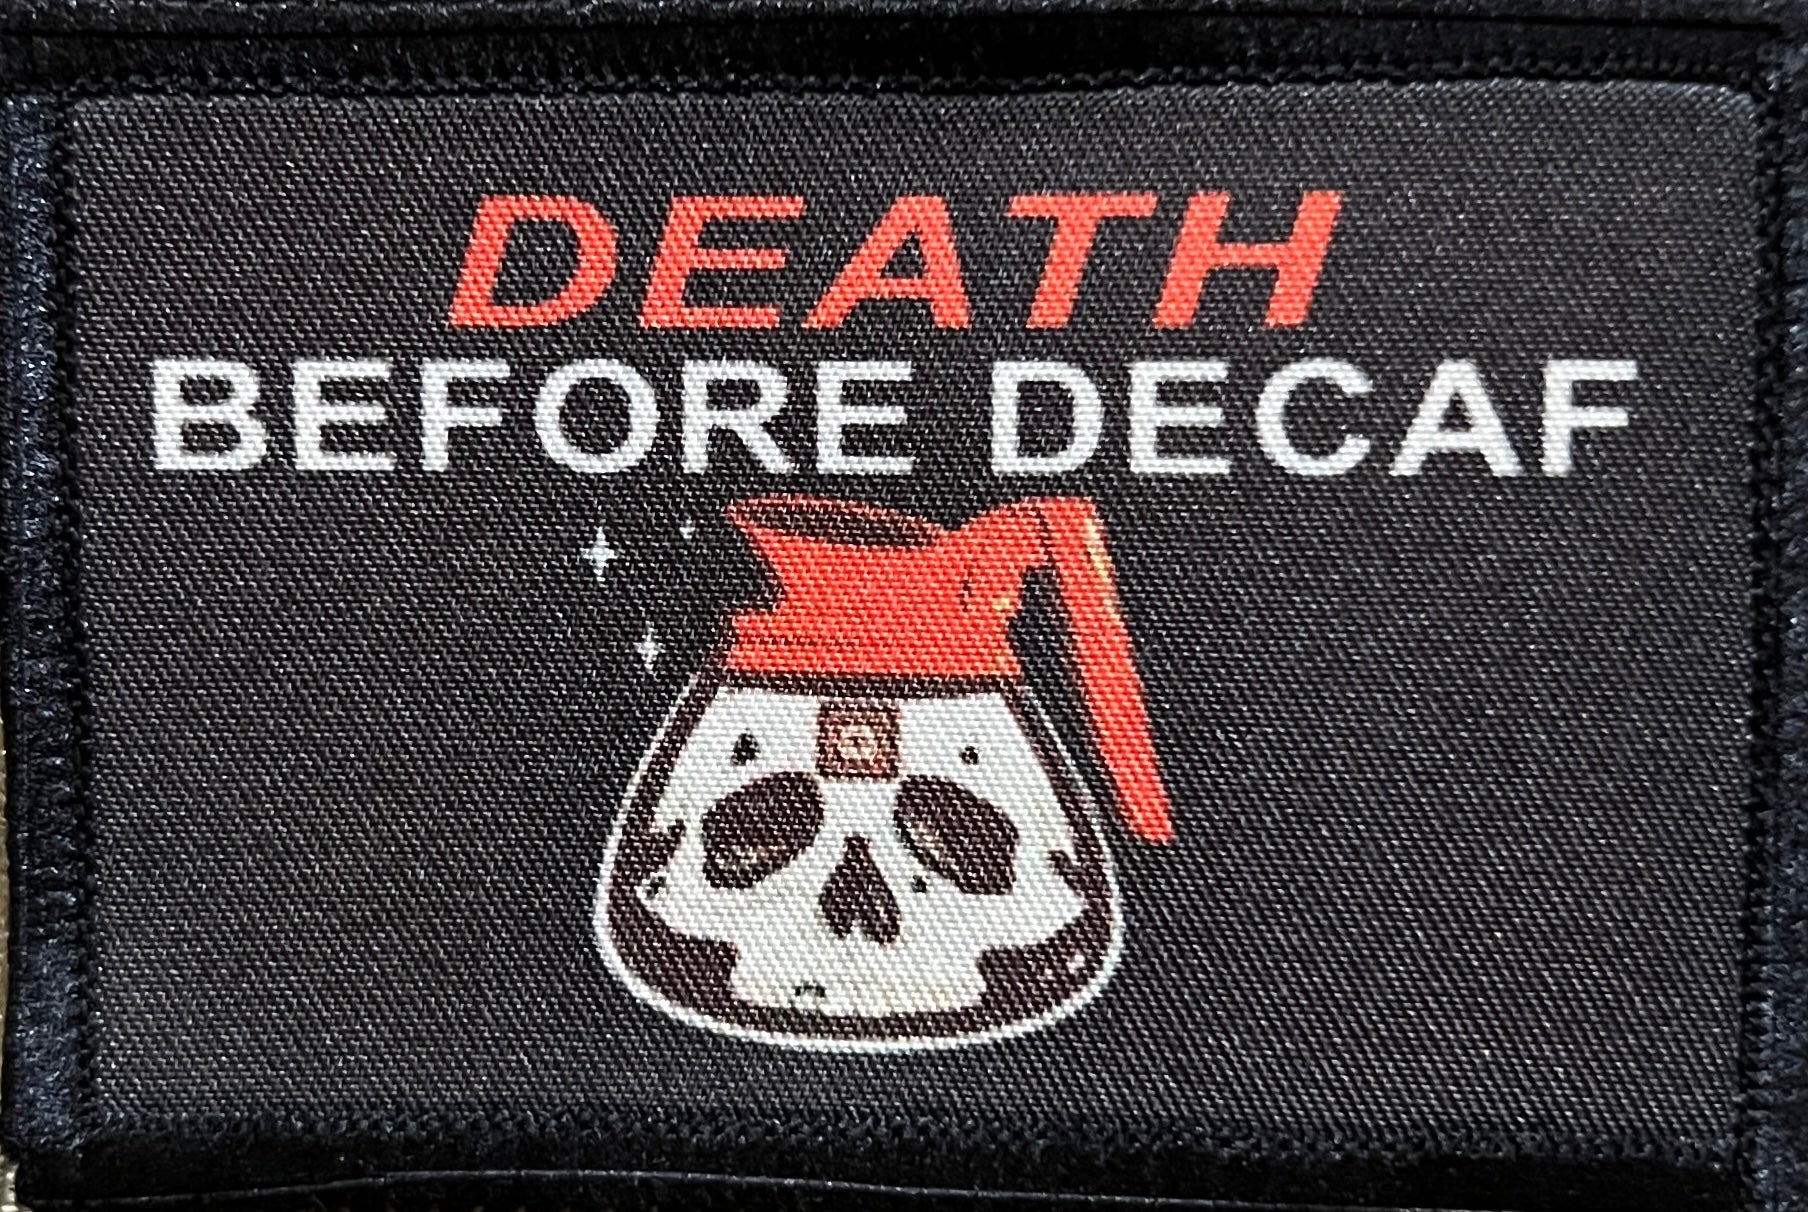 Death Before Decaf Morale Patch Morale Patches Redheaded T Shirts 